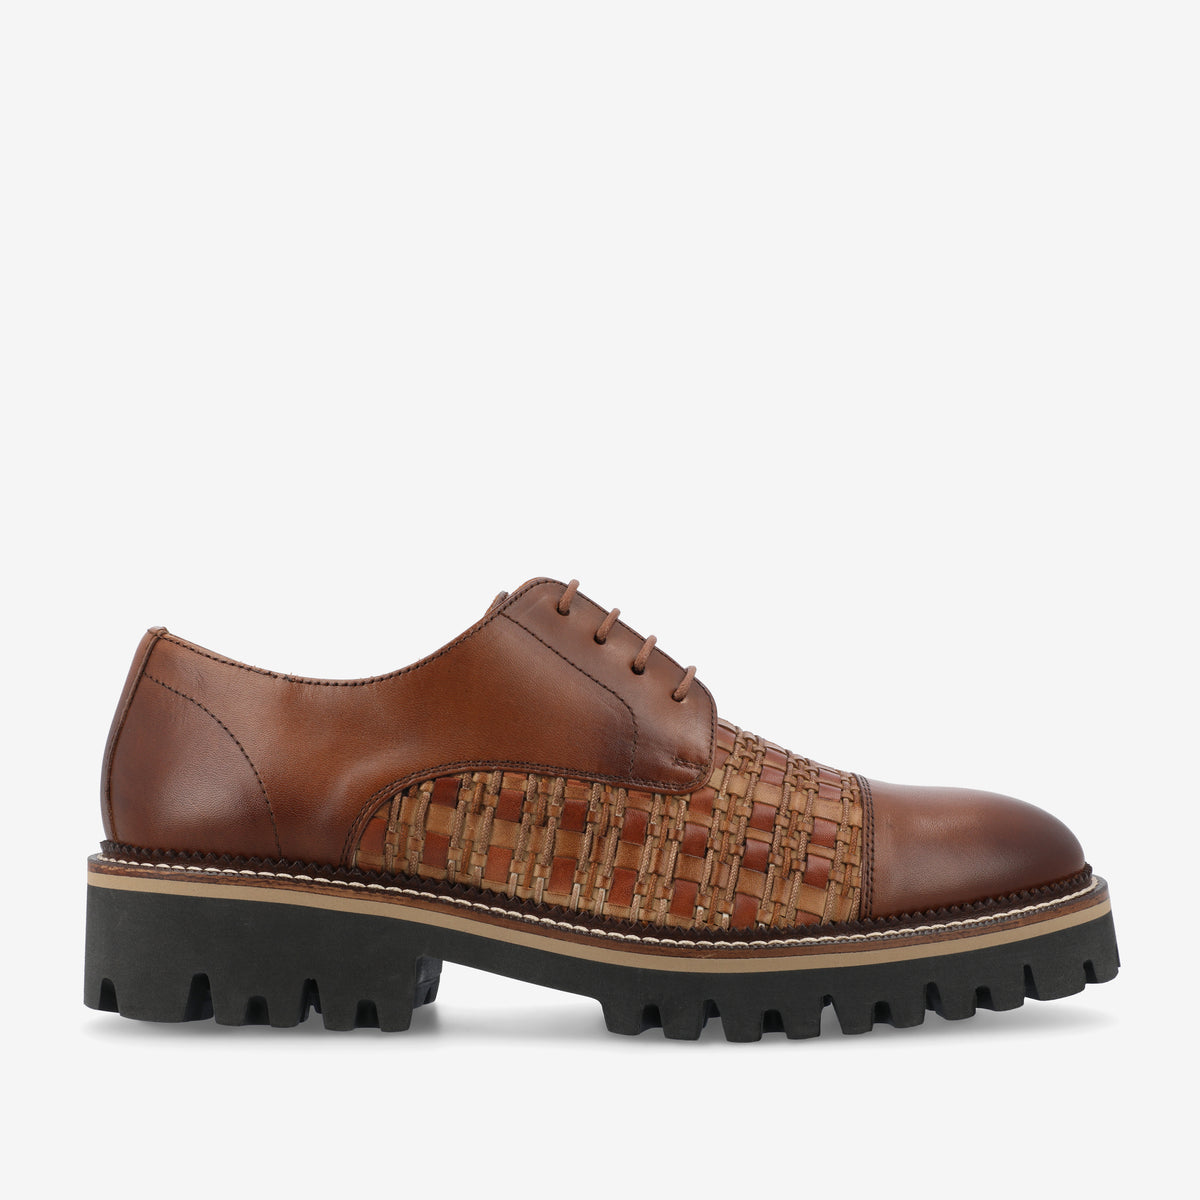 The Lucia Shoe in Brown Woven